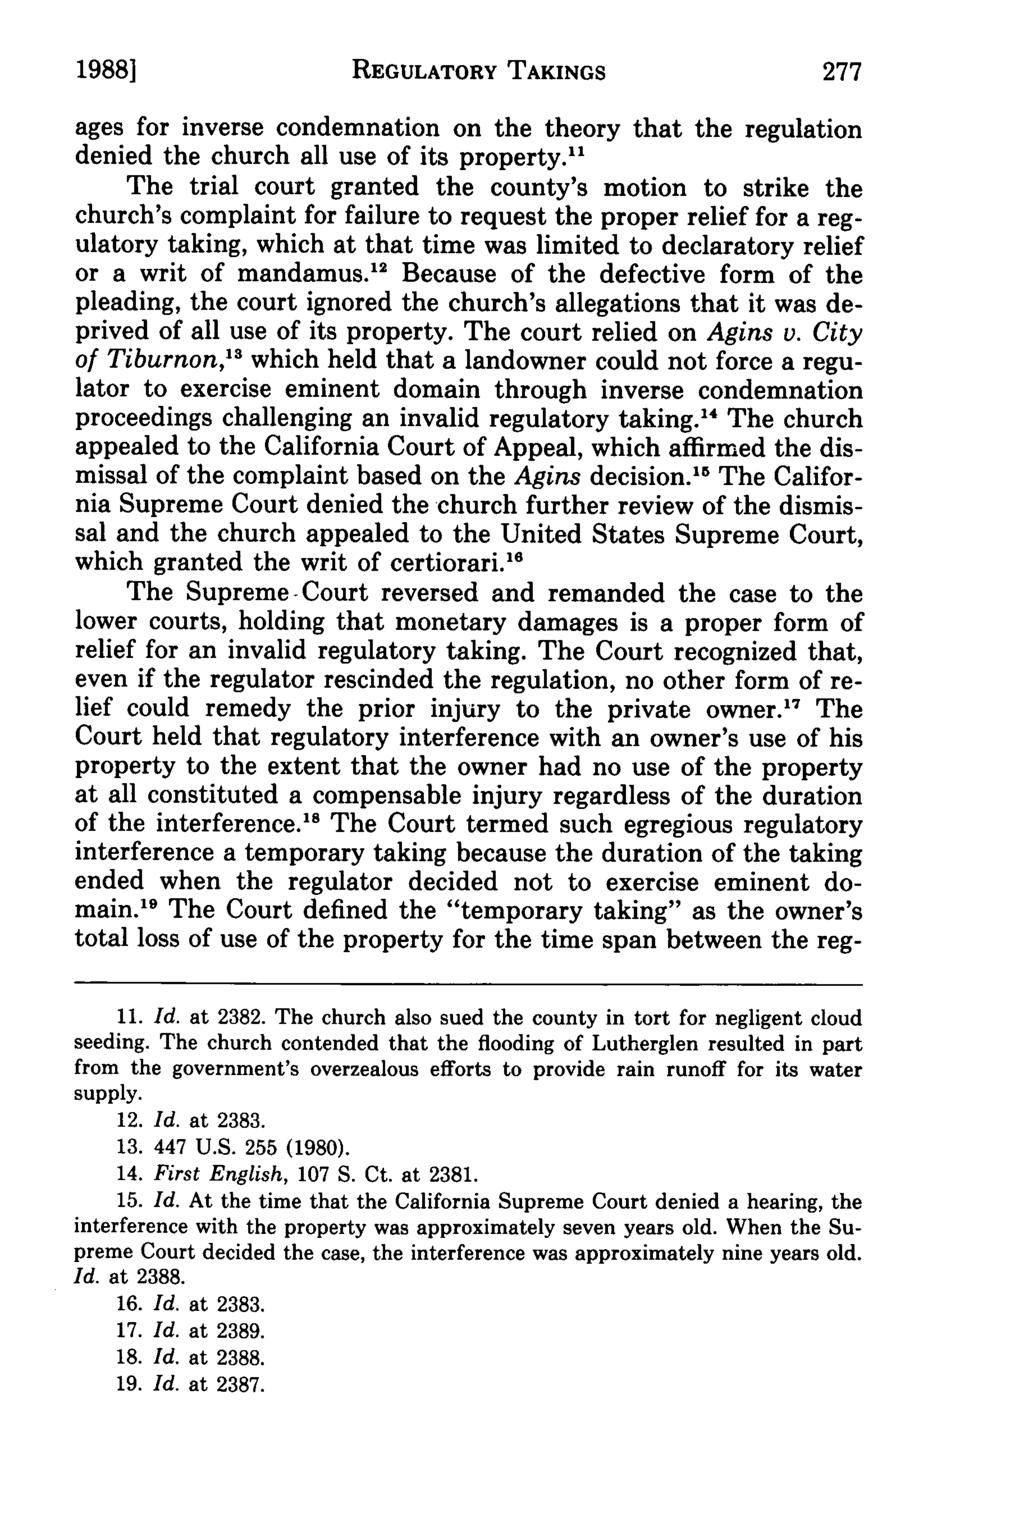 1988] Woodard: Constitutional Law: Is Time Running out for the Government to Dis REGULATORY TAKINGS ages for inverse condemnation on the theory that the regulation denied the church all use of its